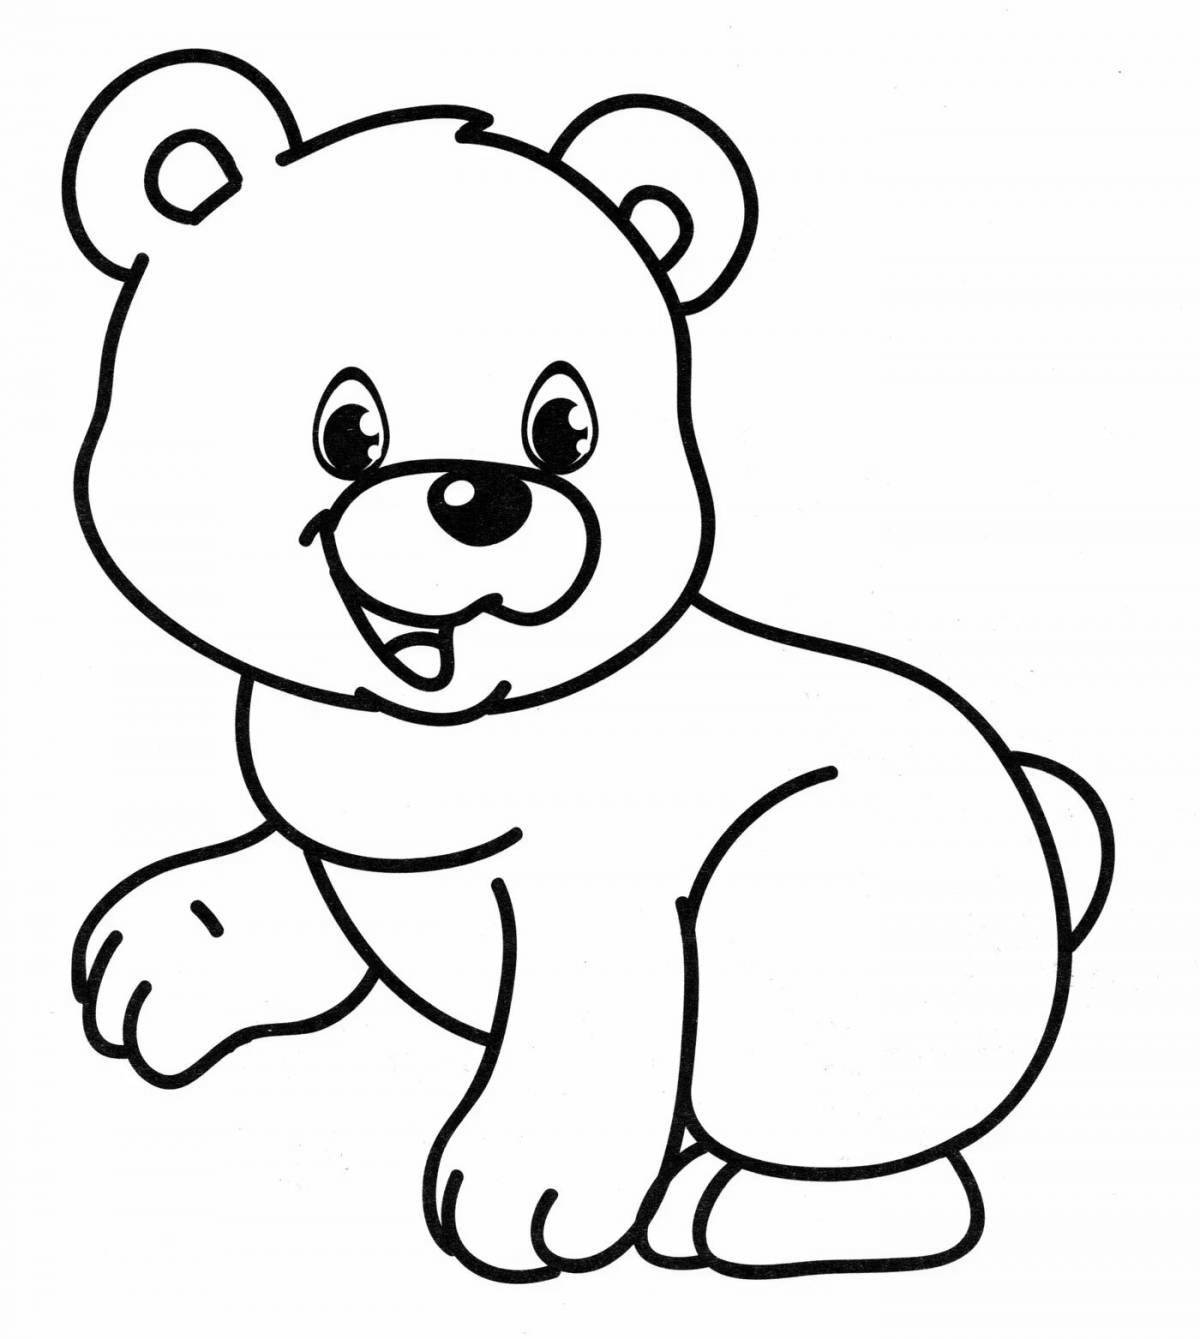 Teddy bear coloring book for 2-3 year olds